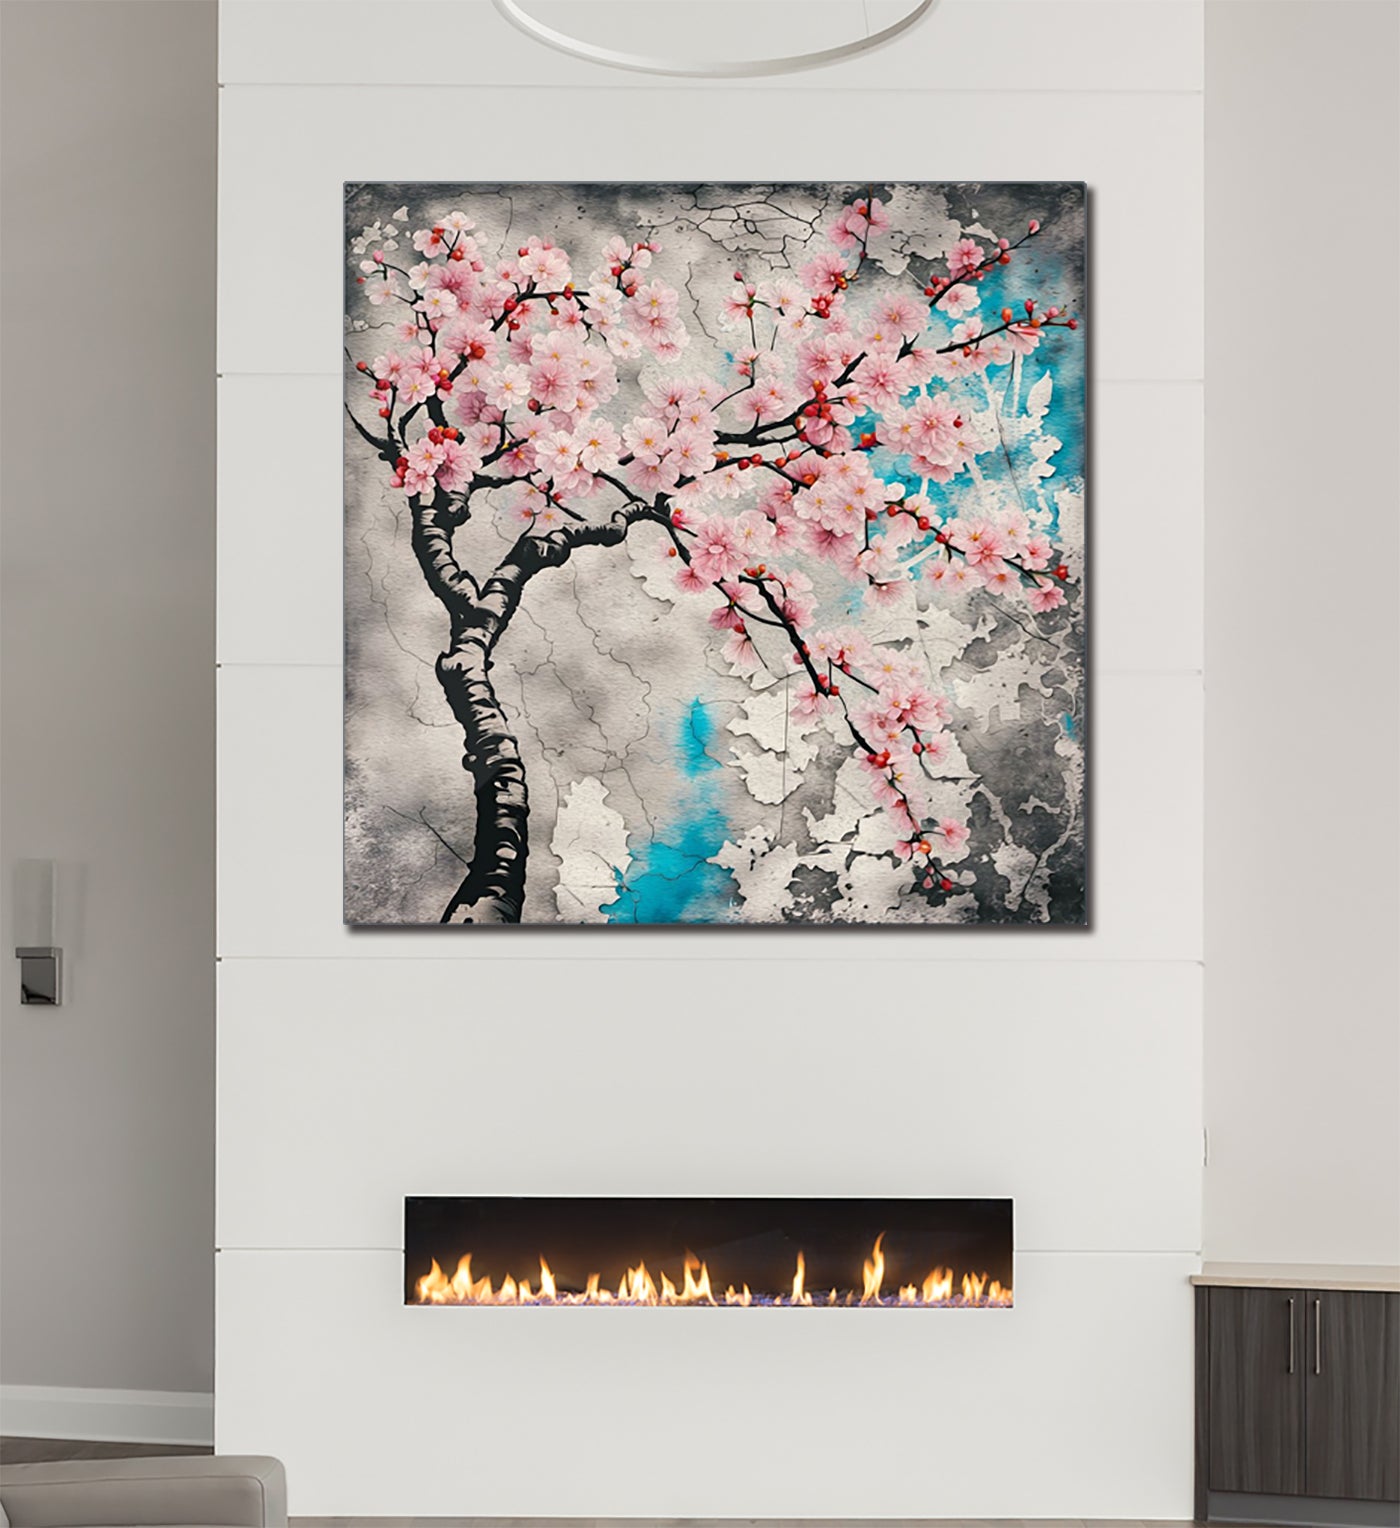 Asian Themed Wall Art - Street Style Cherry Blossoms Printed on Recycled Aluminum hung above fireplace